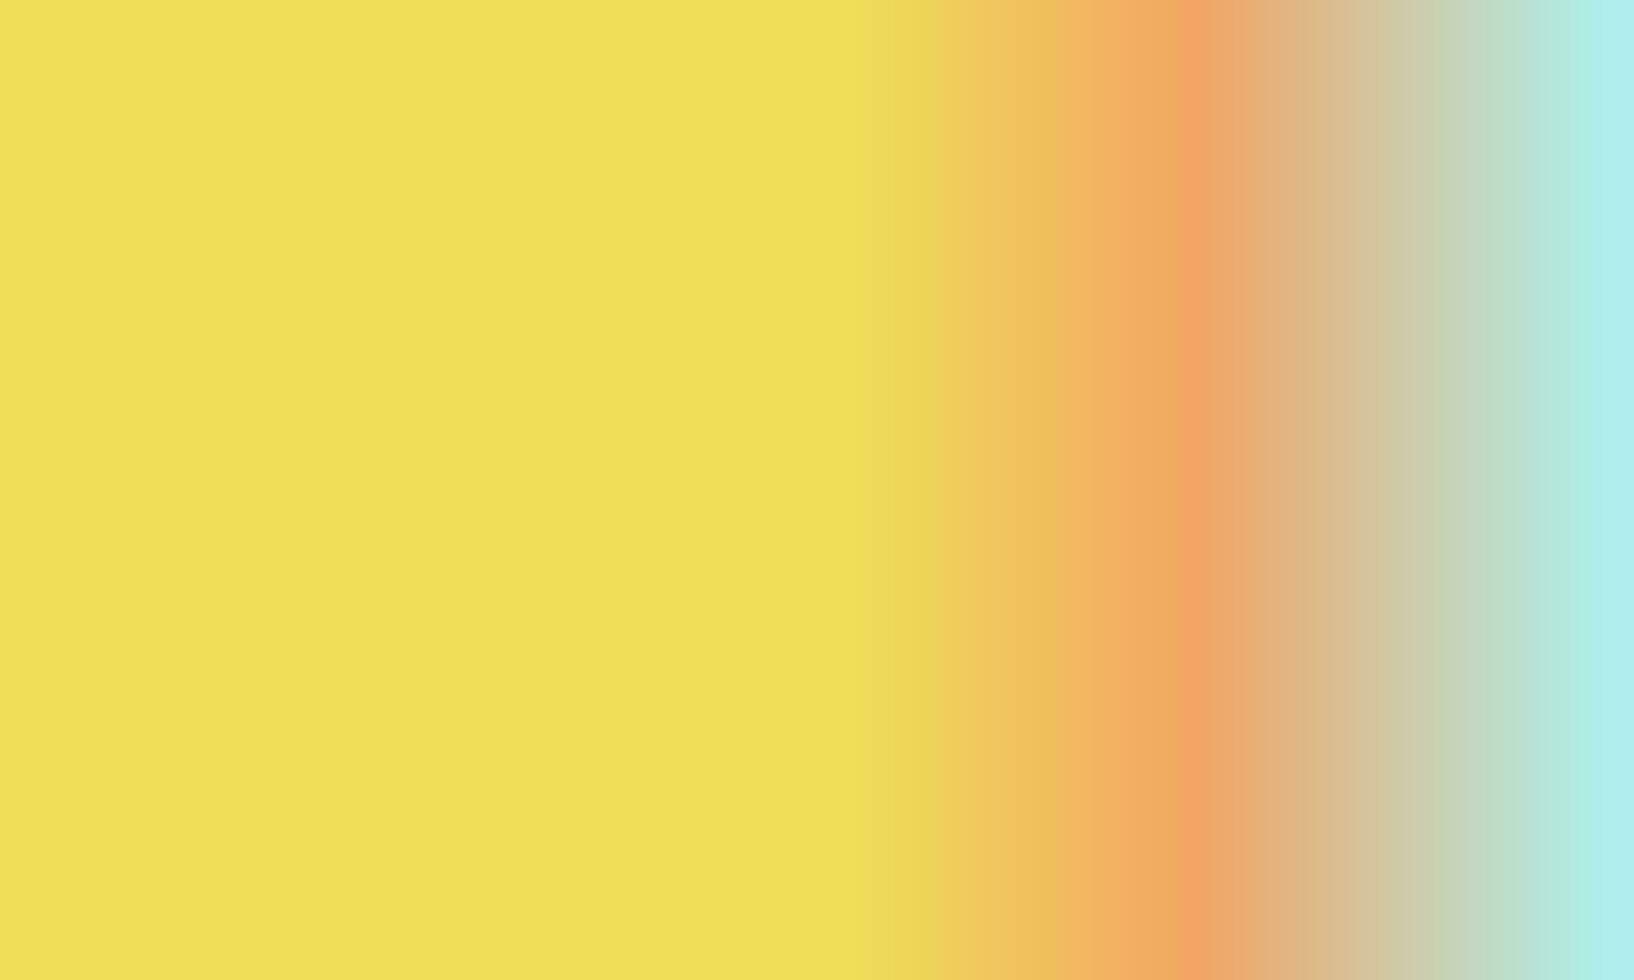 Design simple highlighter blue,yellow and orange gradient color illustration background photo